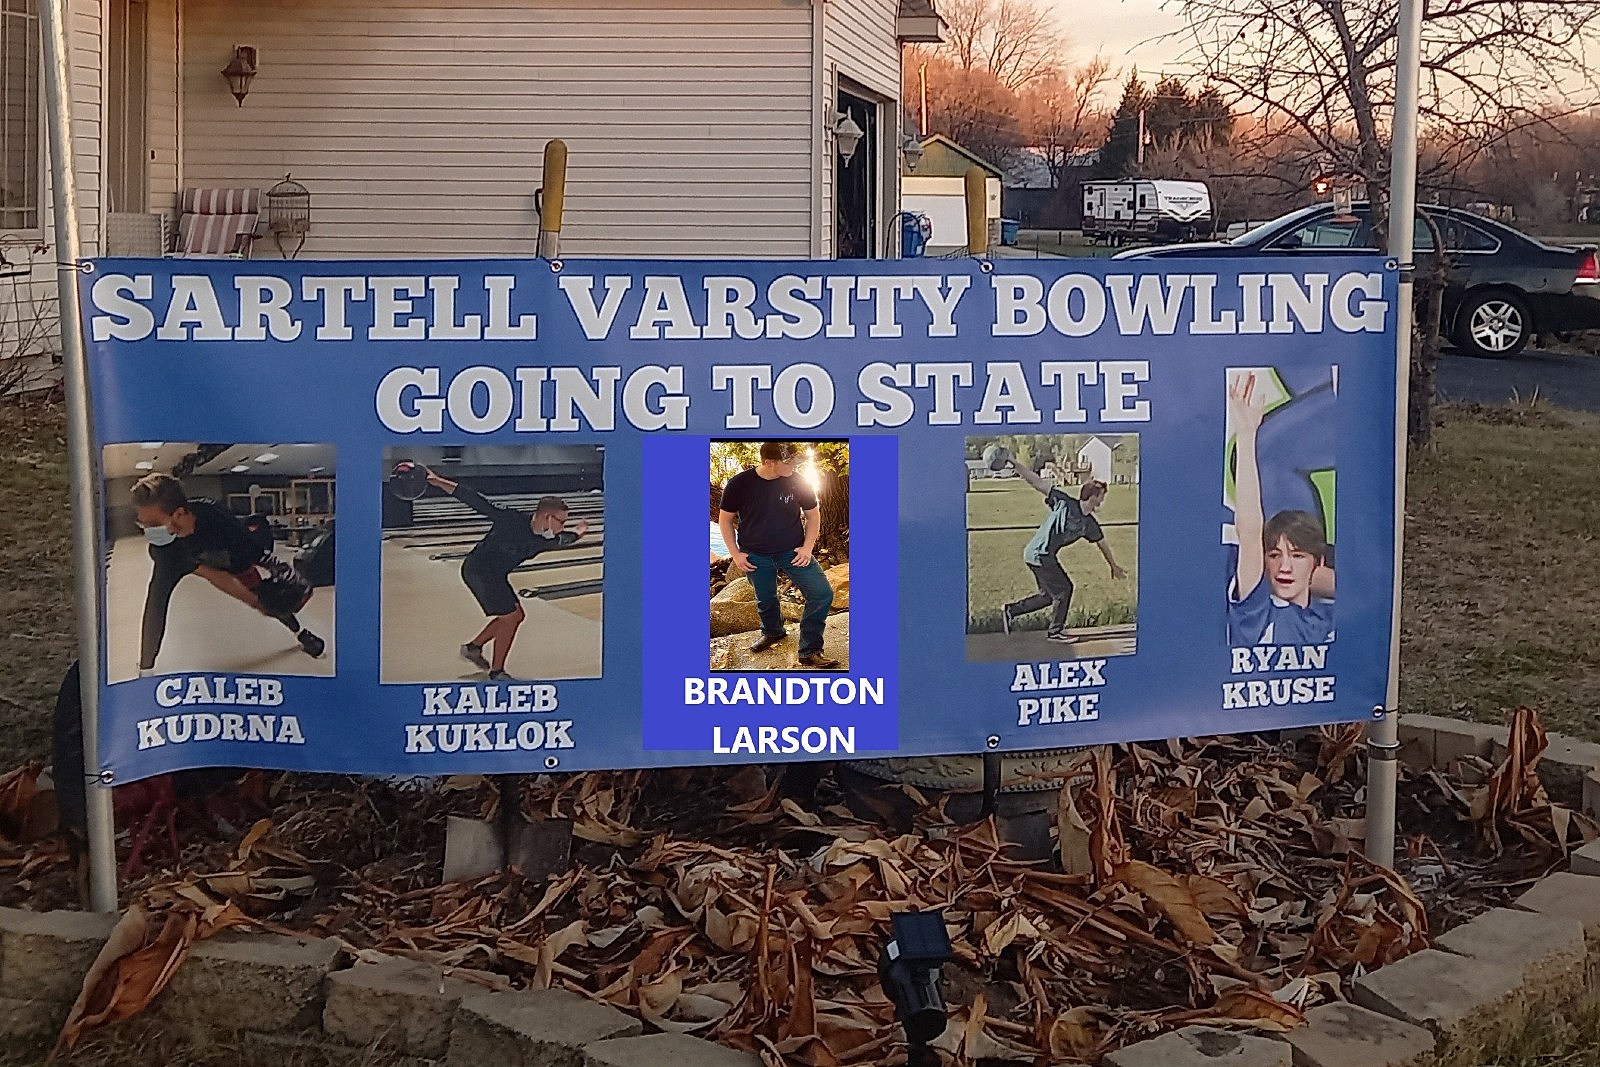 Sartell-St Stephen Varsity Bowling Team Going To State Saturday photo photo